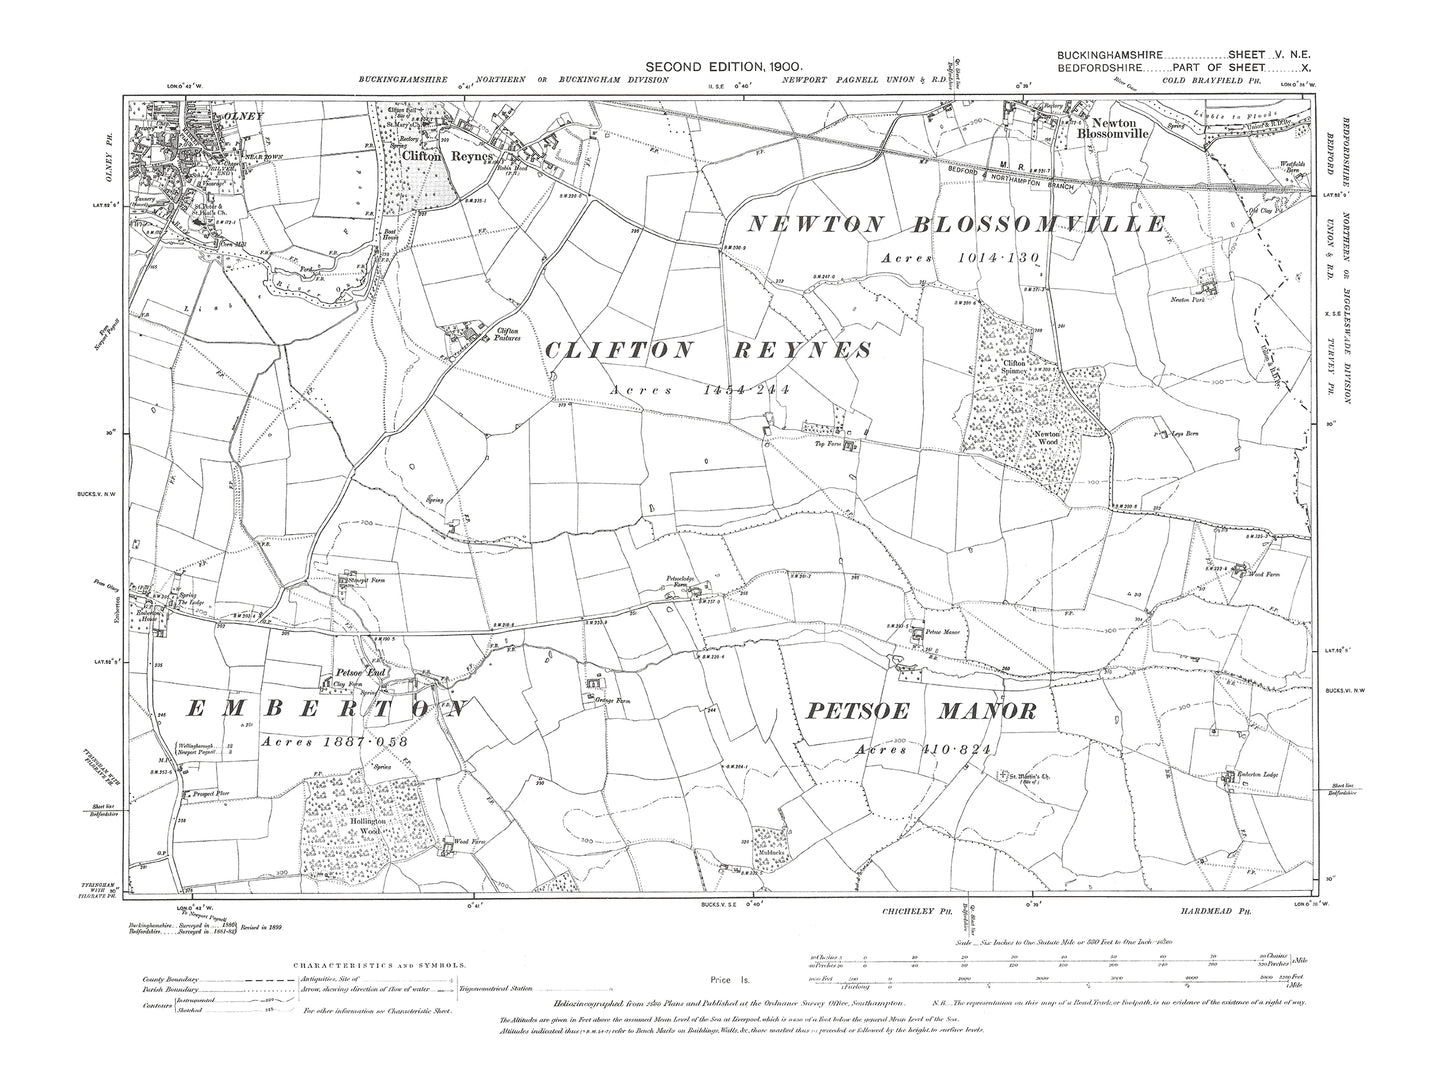 Old OS map dated 1900, showing Olney (south), Clifton Reynes, Newton Blossomville (south) in Buckinghamshire - 5NE